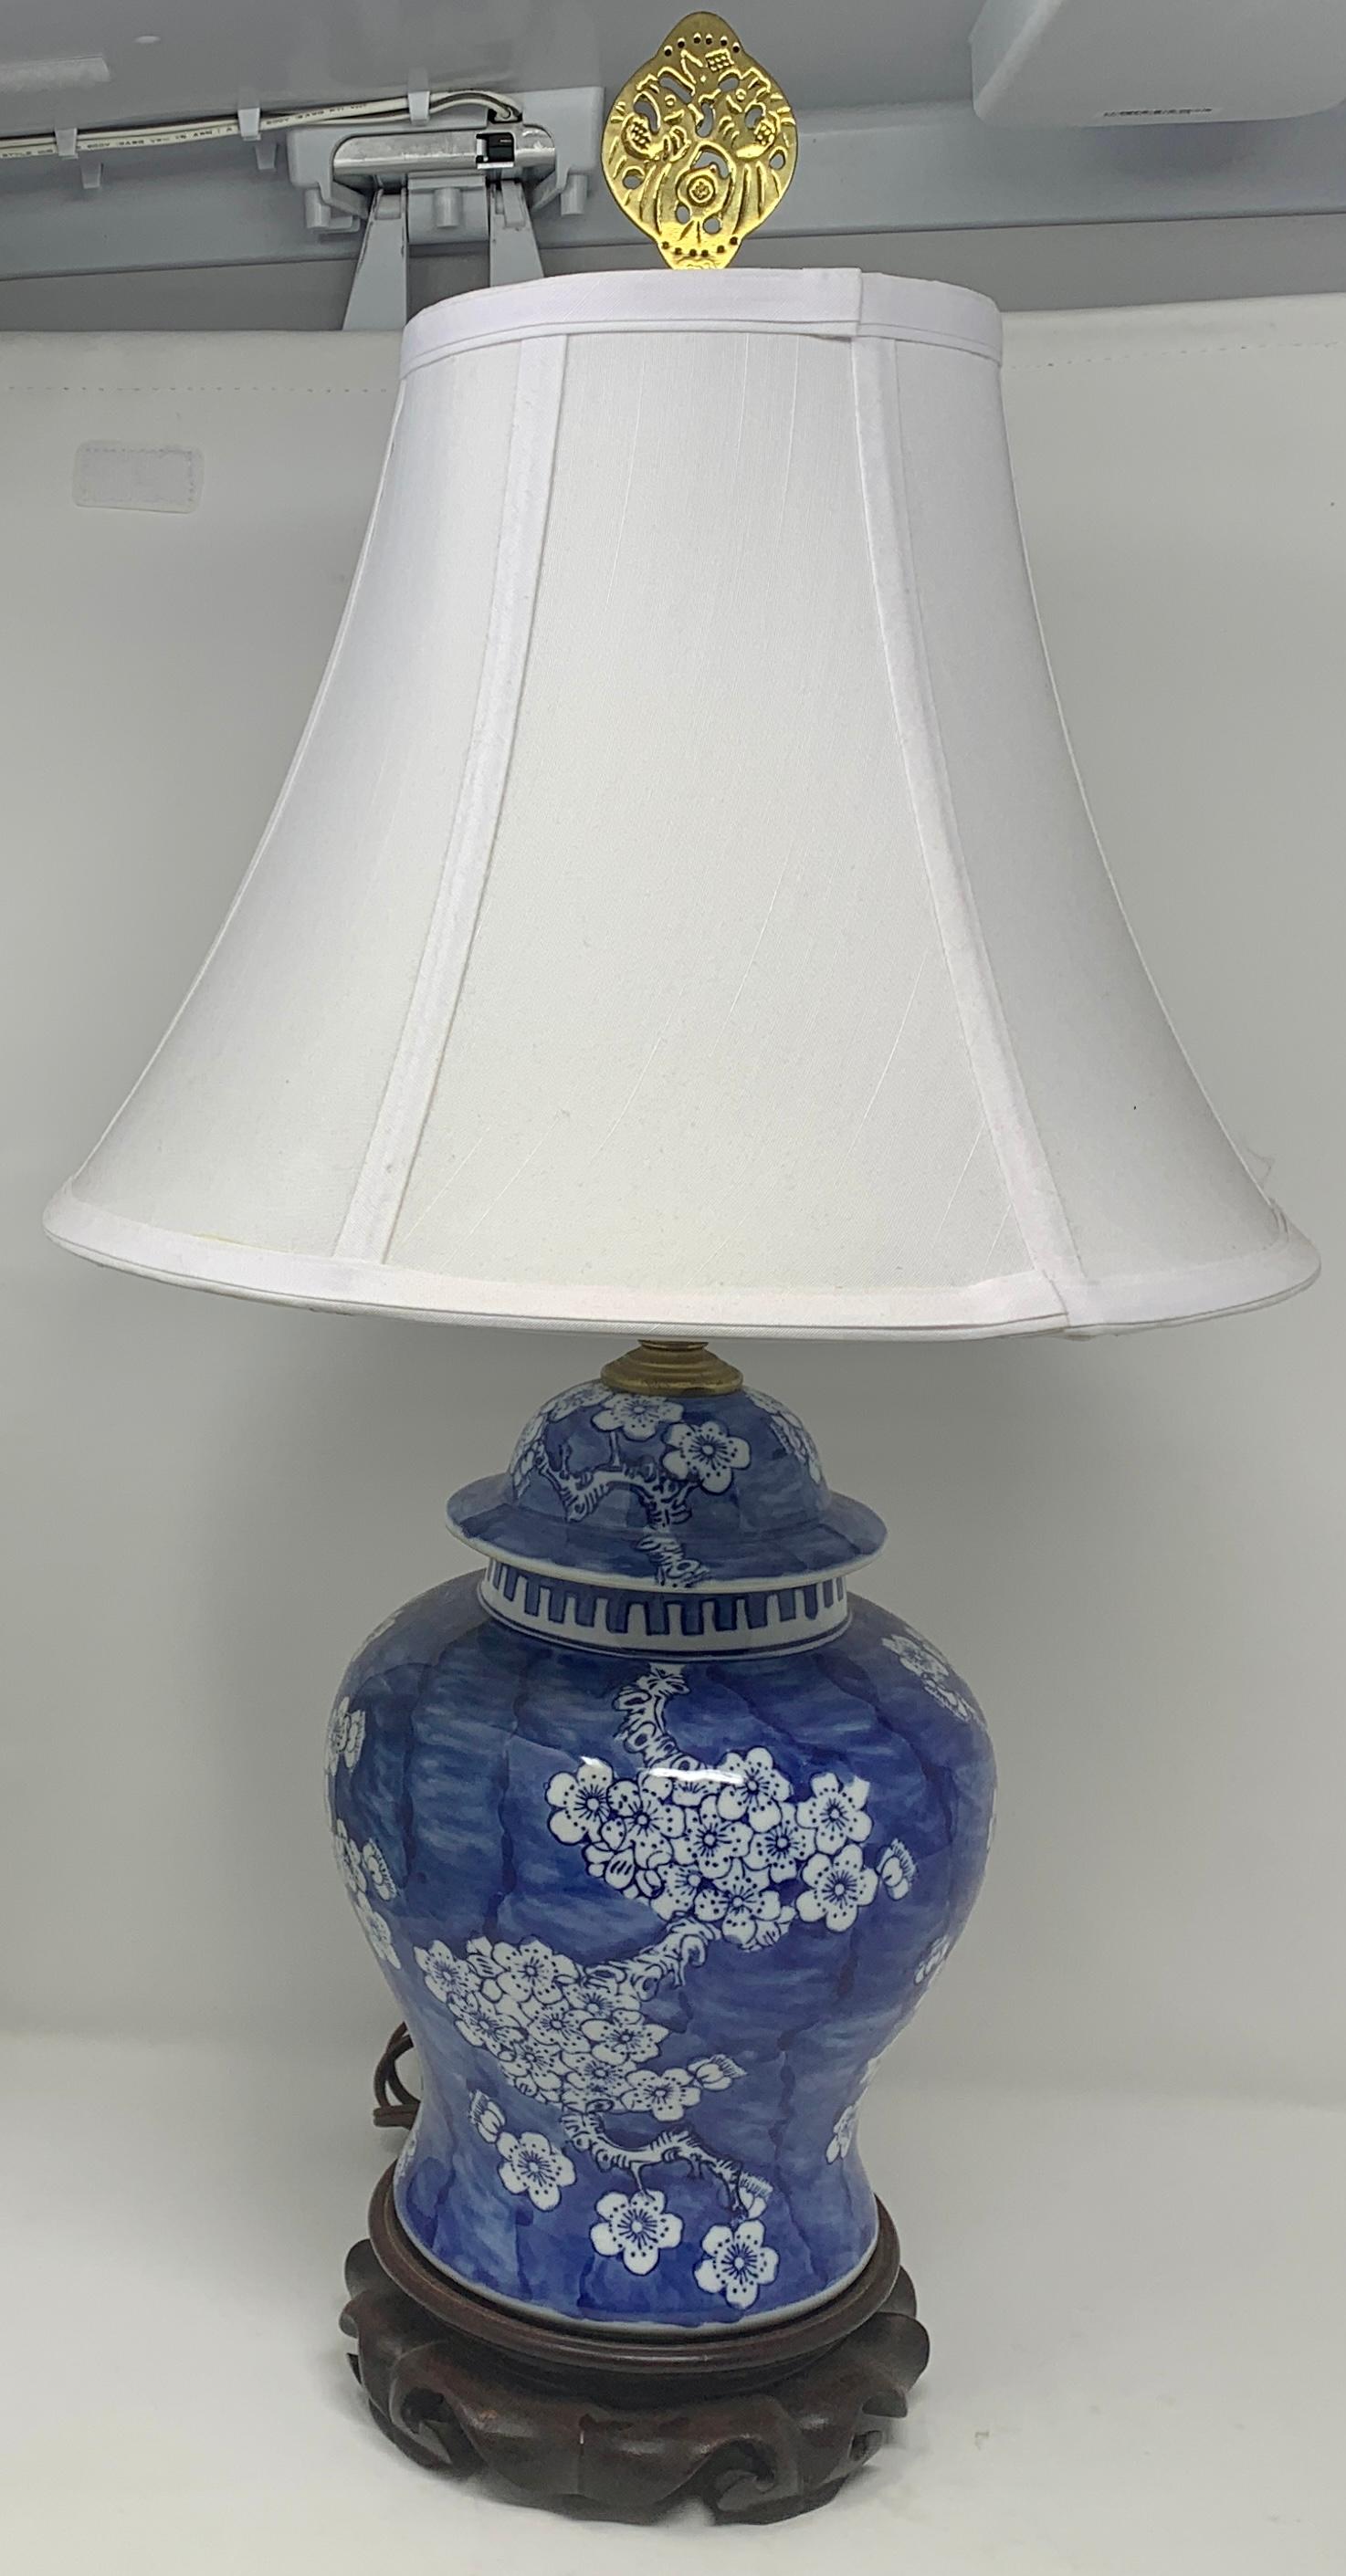 Antique Chinese Blue and White Porcelain Urn Made Into a Lamp, circa 1910. 
1 of a Pair, Sold Individually.

Lamp Shade: 12 1/2 inches wide